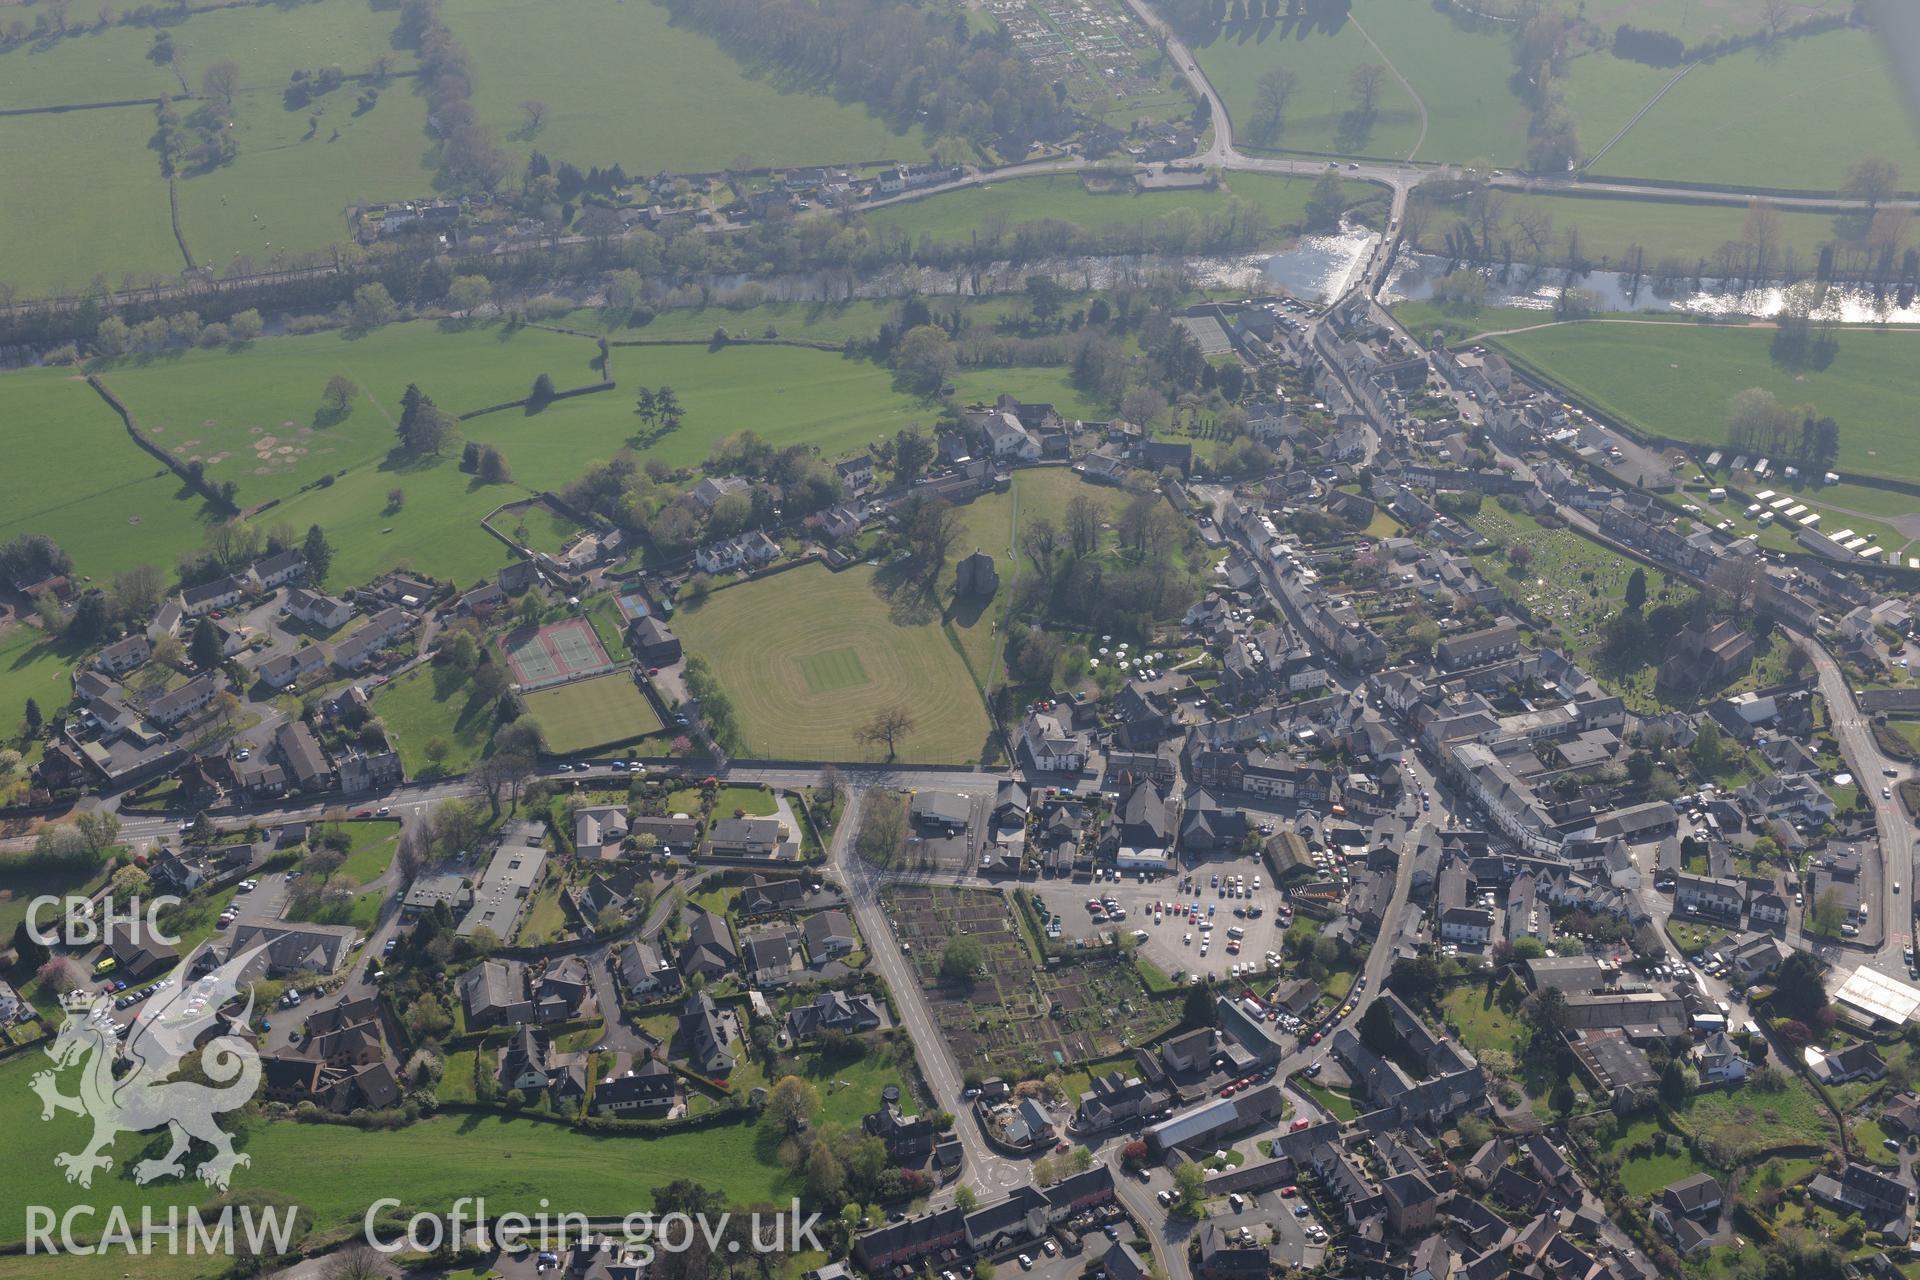 Crickhowell including the castle, Dan-y-Castell House and Danycastell Methodist Chapel. Oblique aerial photograph taken during the Royal Commission's programme of archaeological aerial reconnaissance by Toby Driver on 21st April 2015